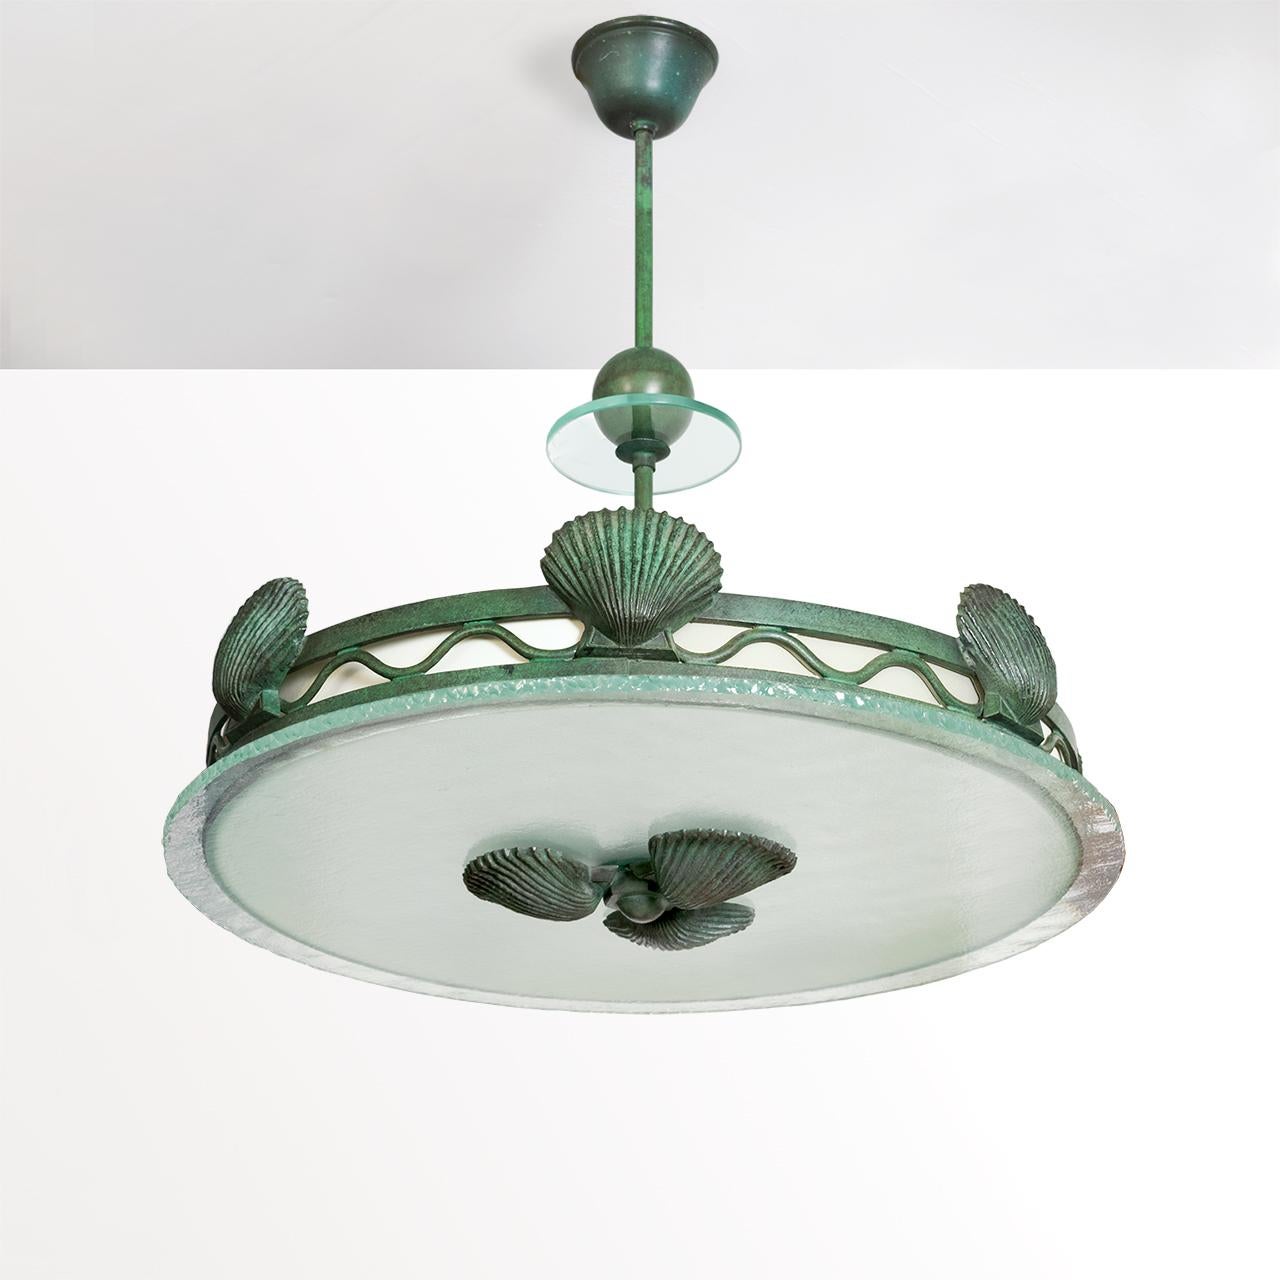 Swedish Art Deco patinated metal pendant with shell motif. The fixtures frame is decorated with a series of shells which are separated by wave like lines which holds a paper shade behind it. The stem features a glass disk and a patinated floating